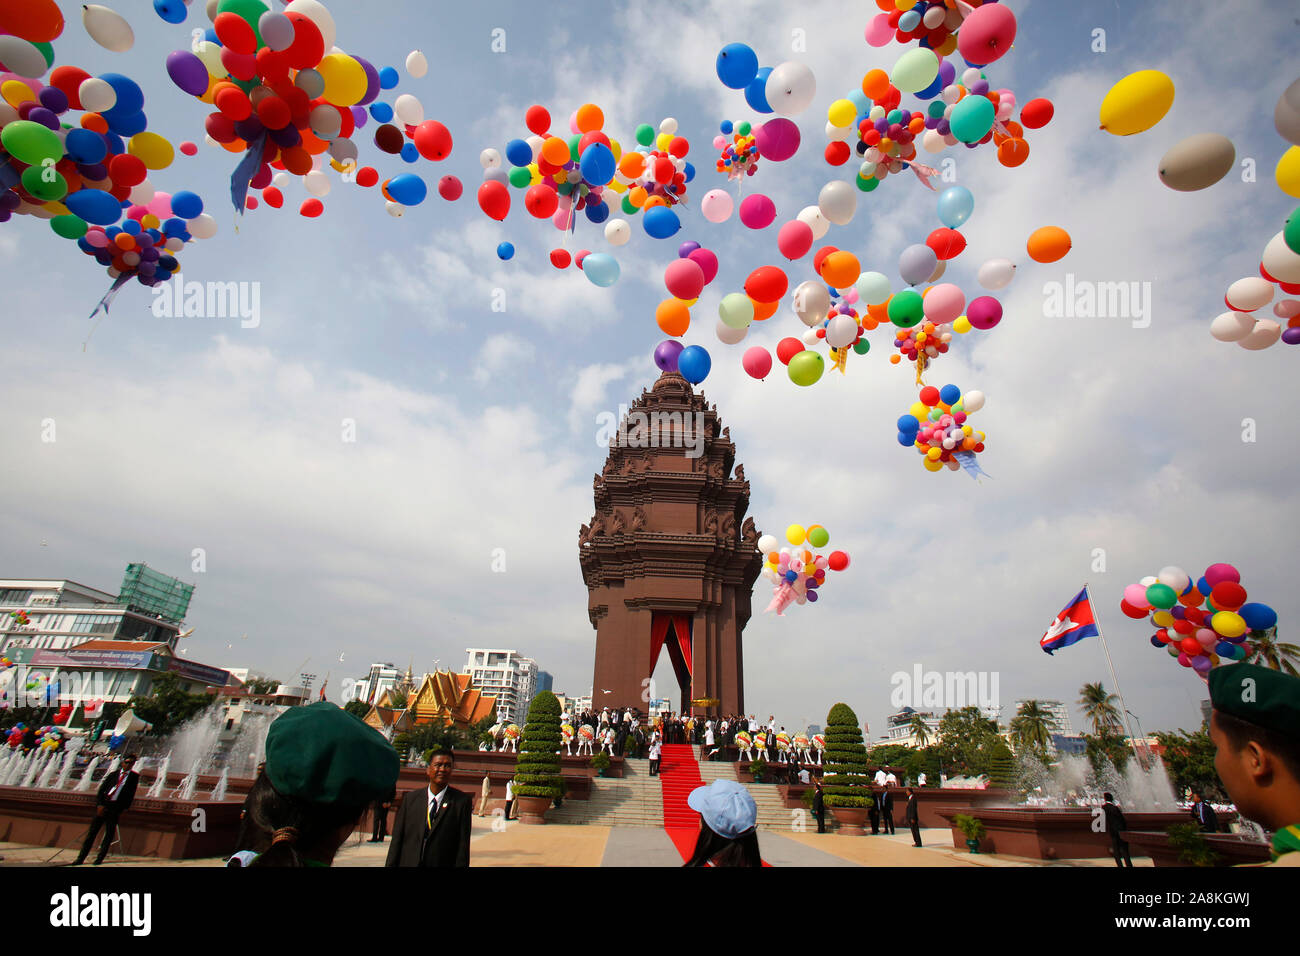 Beijing, Cambodia. 9th Nov, 2019. Balloons are released during the Independence Day celebration in Phnom Penh, Cambodia, Nov. 9, 2019. Cambodia commemorated the 66th anniversary of independence from the French colonial rule on Saturday. Credit: Sovannara/Xinhua/Alamy Live News Stock Photo